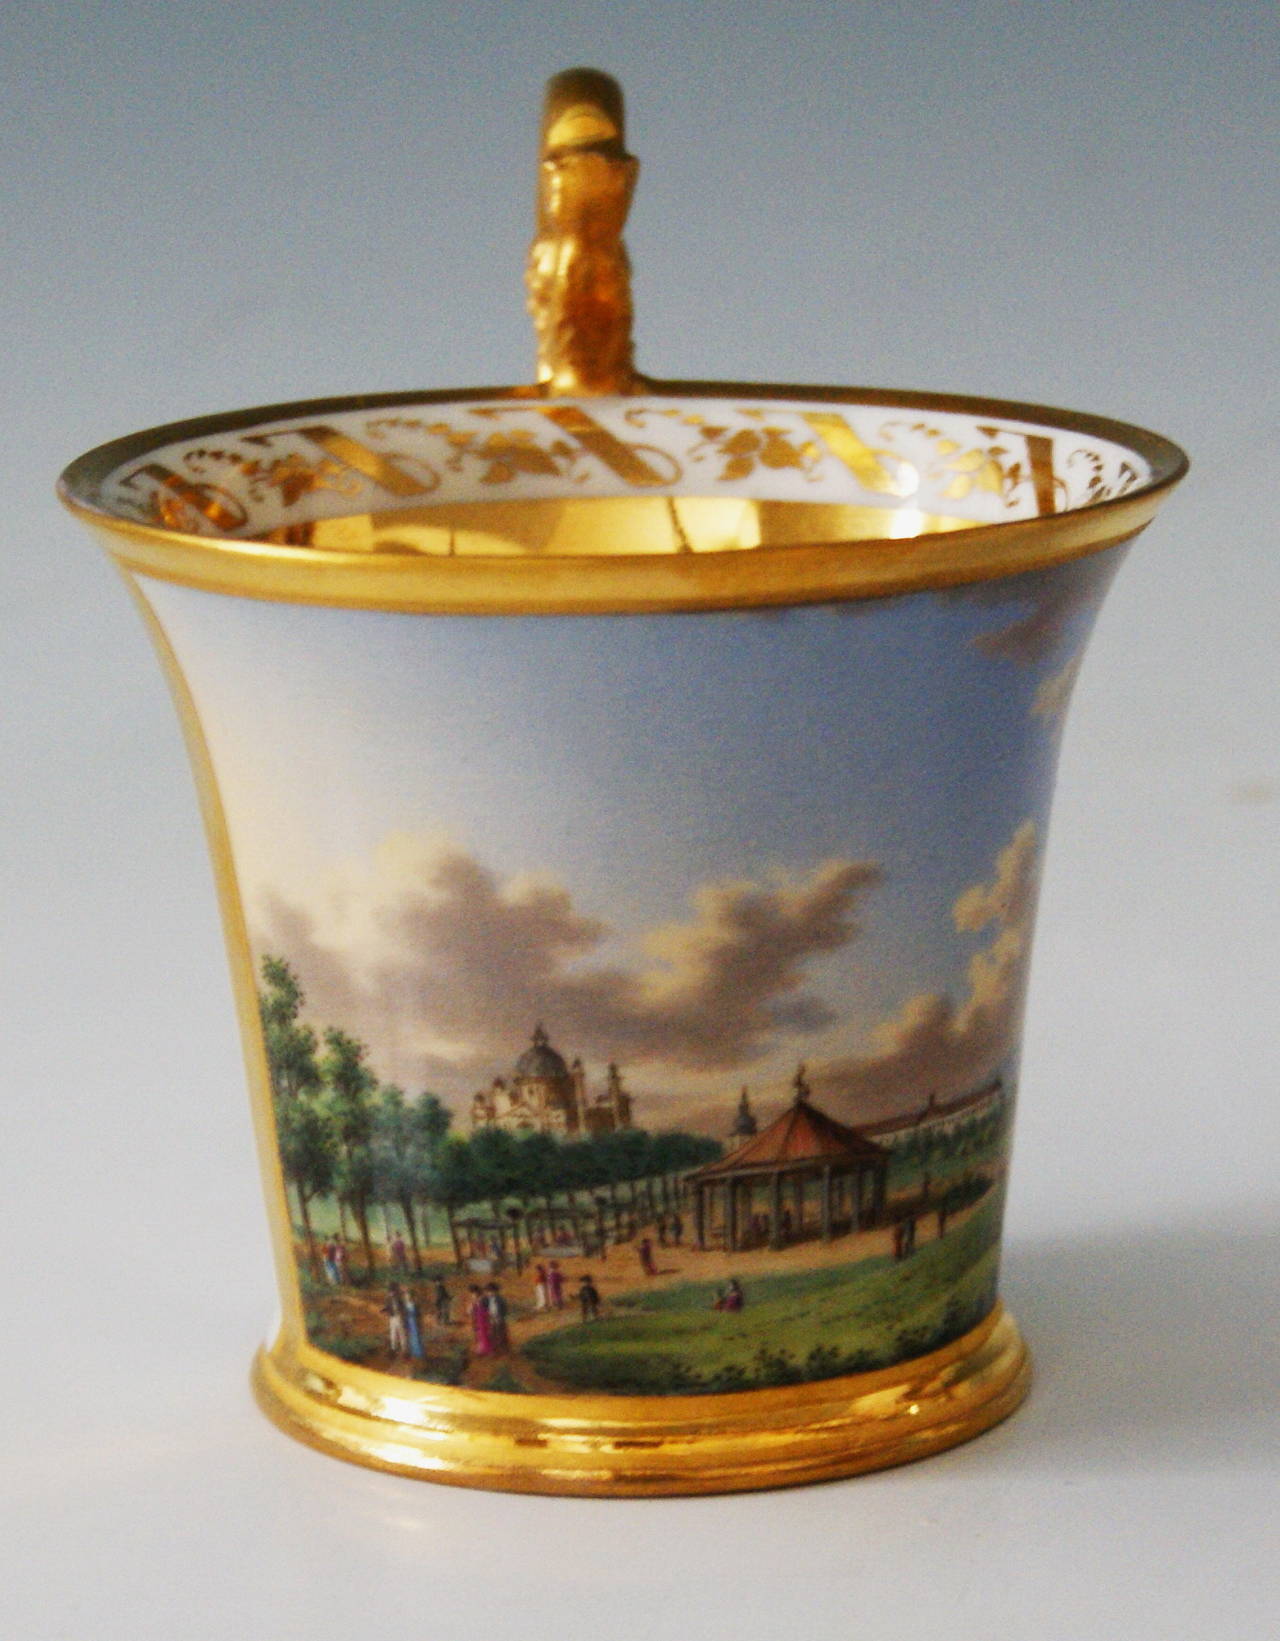 Painted Imperial Porcelain Cup and Saucer with Landscape Scene, Vienna, 1819